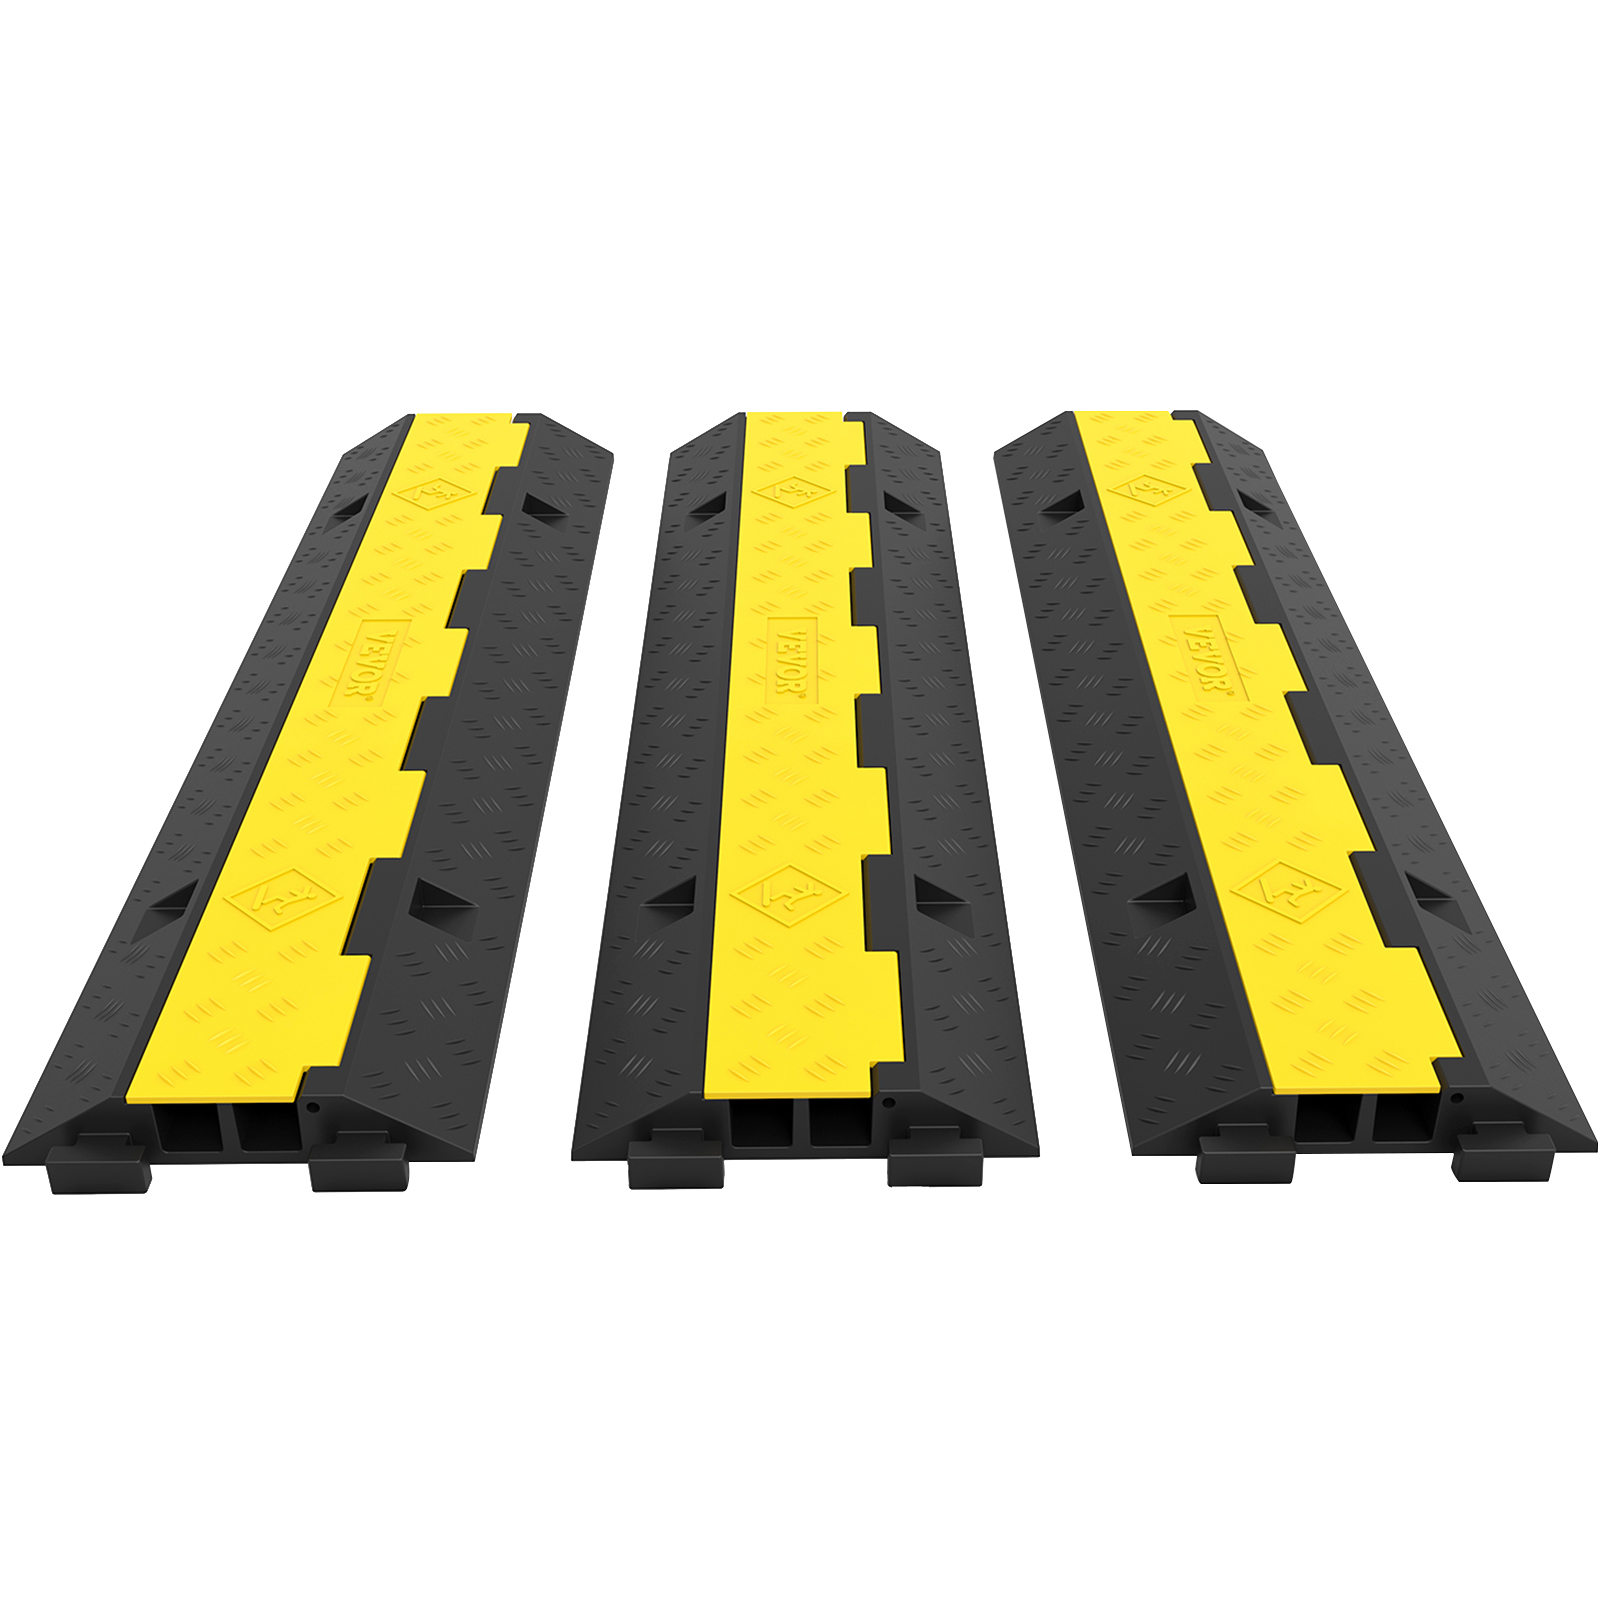 3 Pcs 2-Cable Rubber 40"x9.8"x2" Electrical Wire Cover Protector Ramp Snake Cord Vehicle&nbsp от Vevor Many GEOs